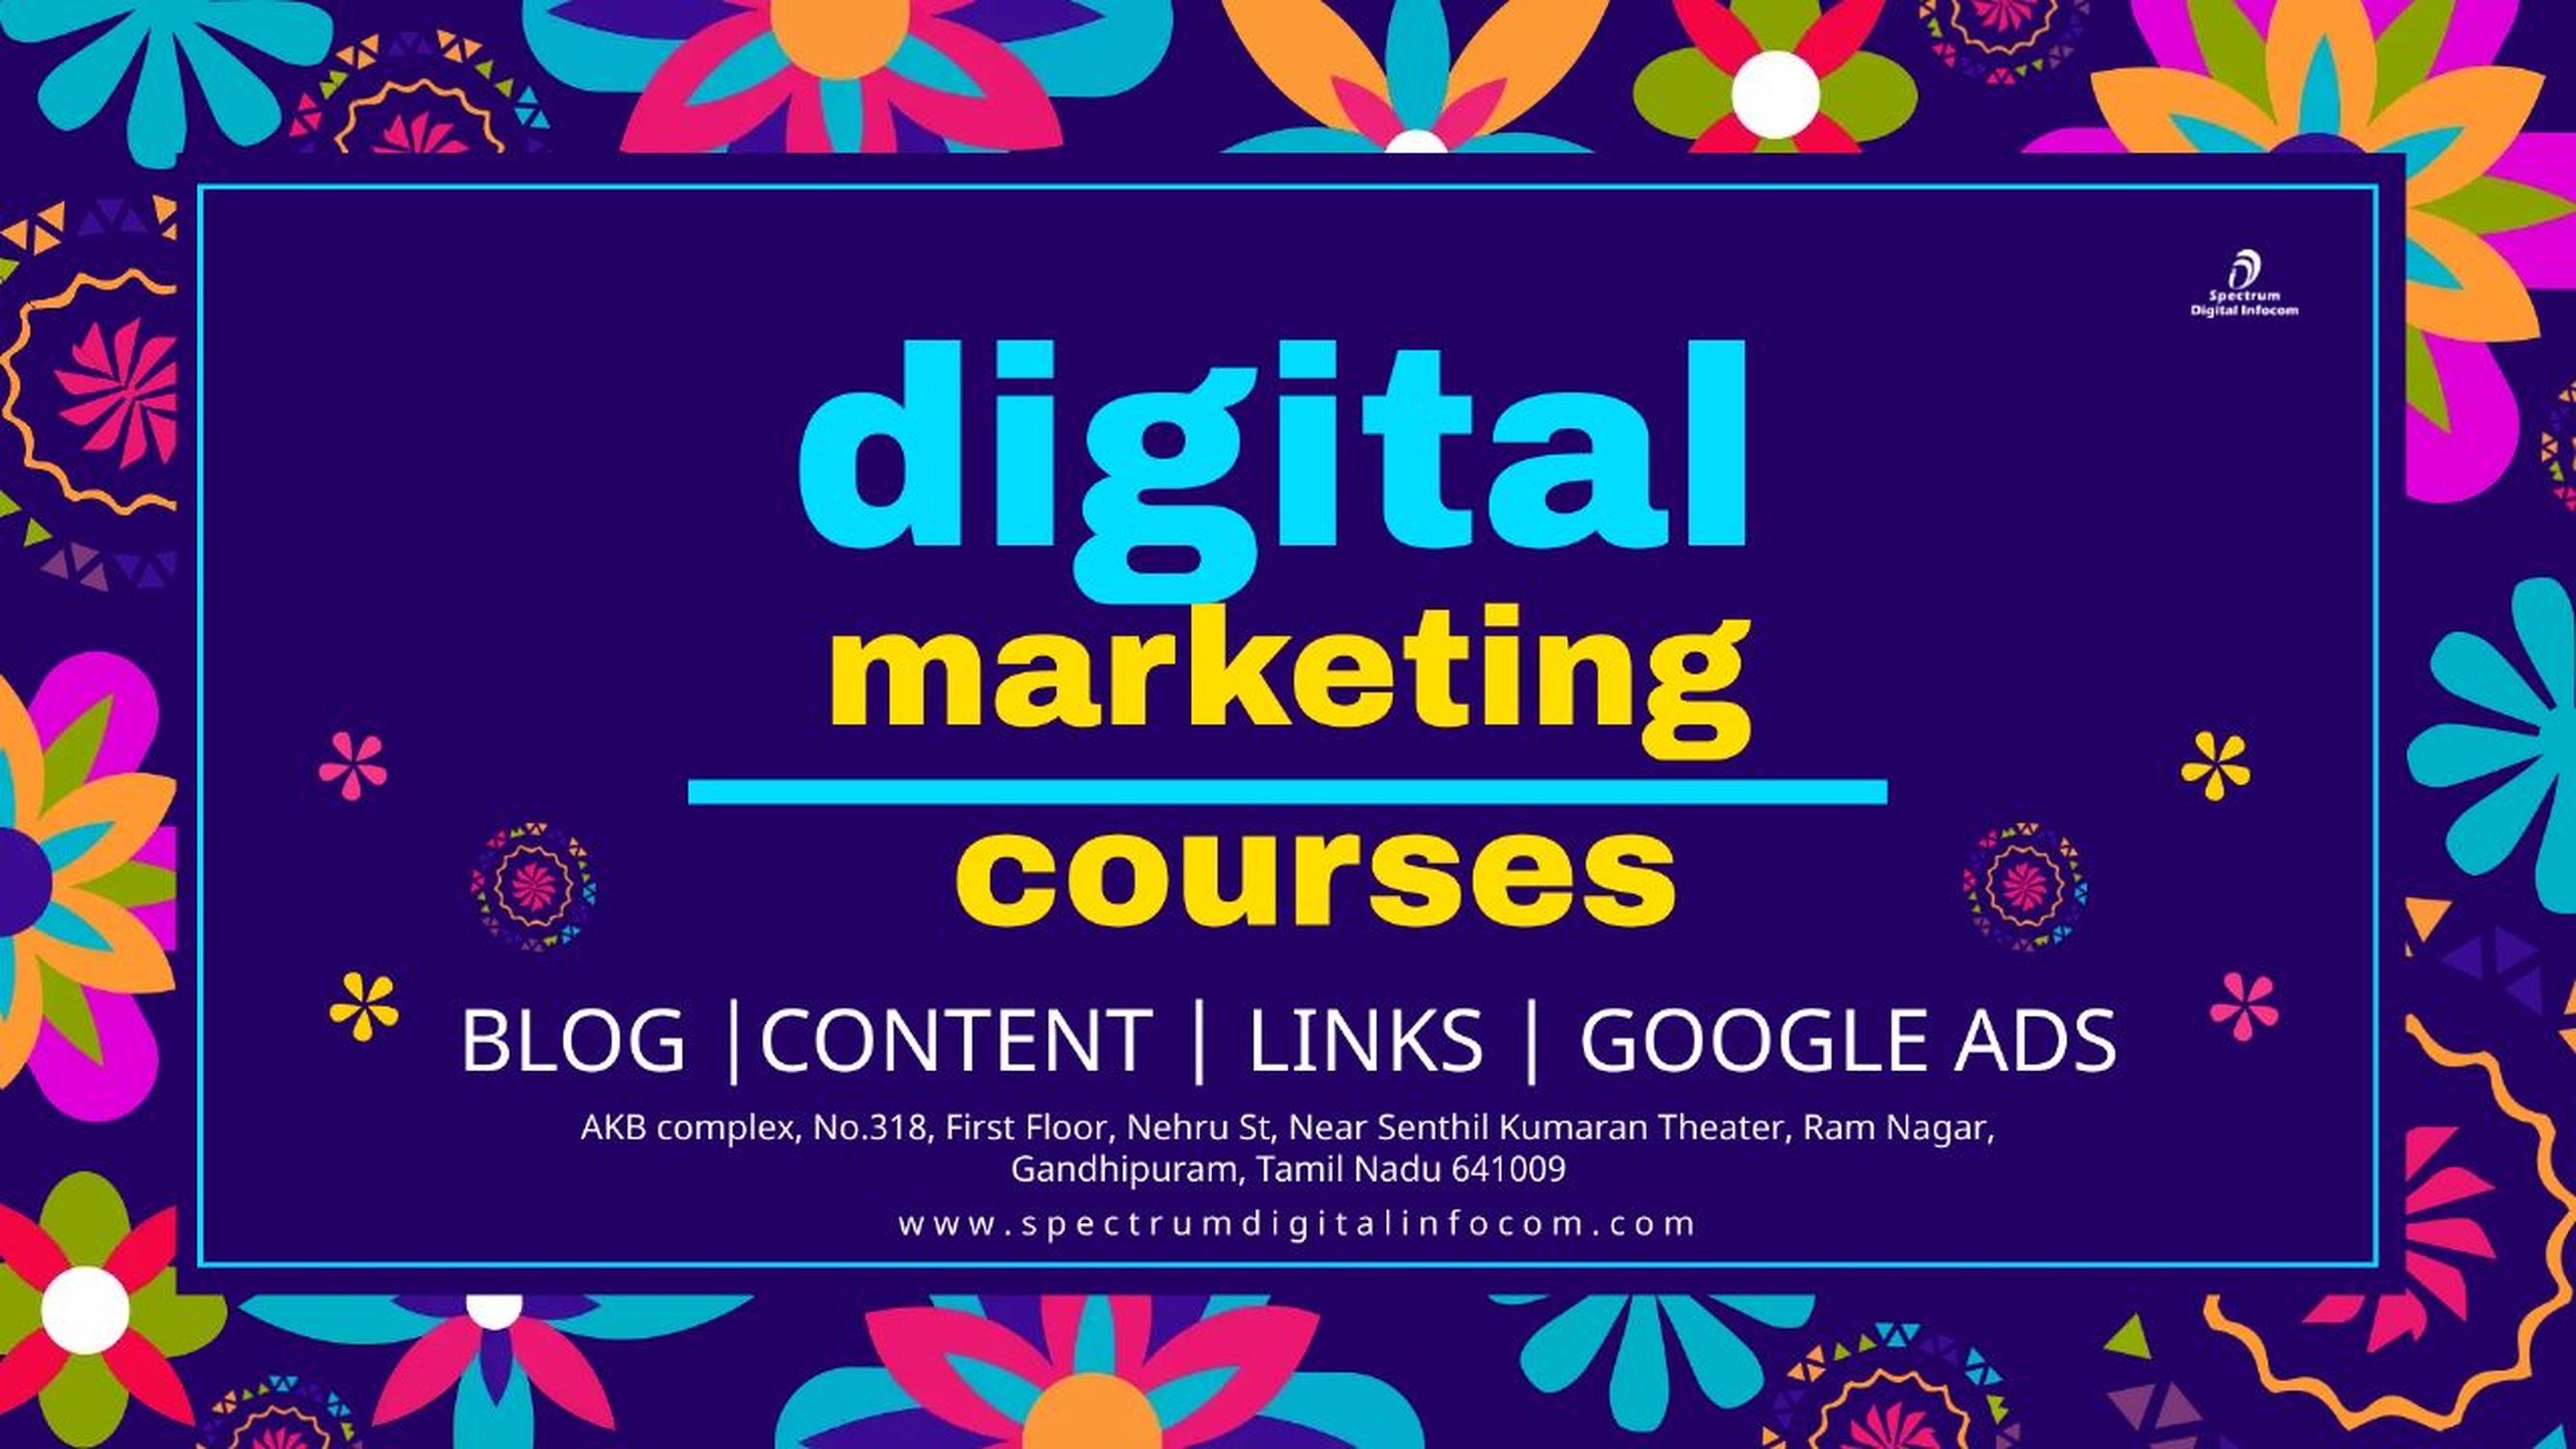 digital marketing course in coimbatore123123, Online Event